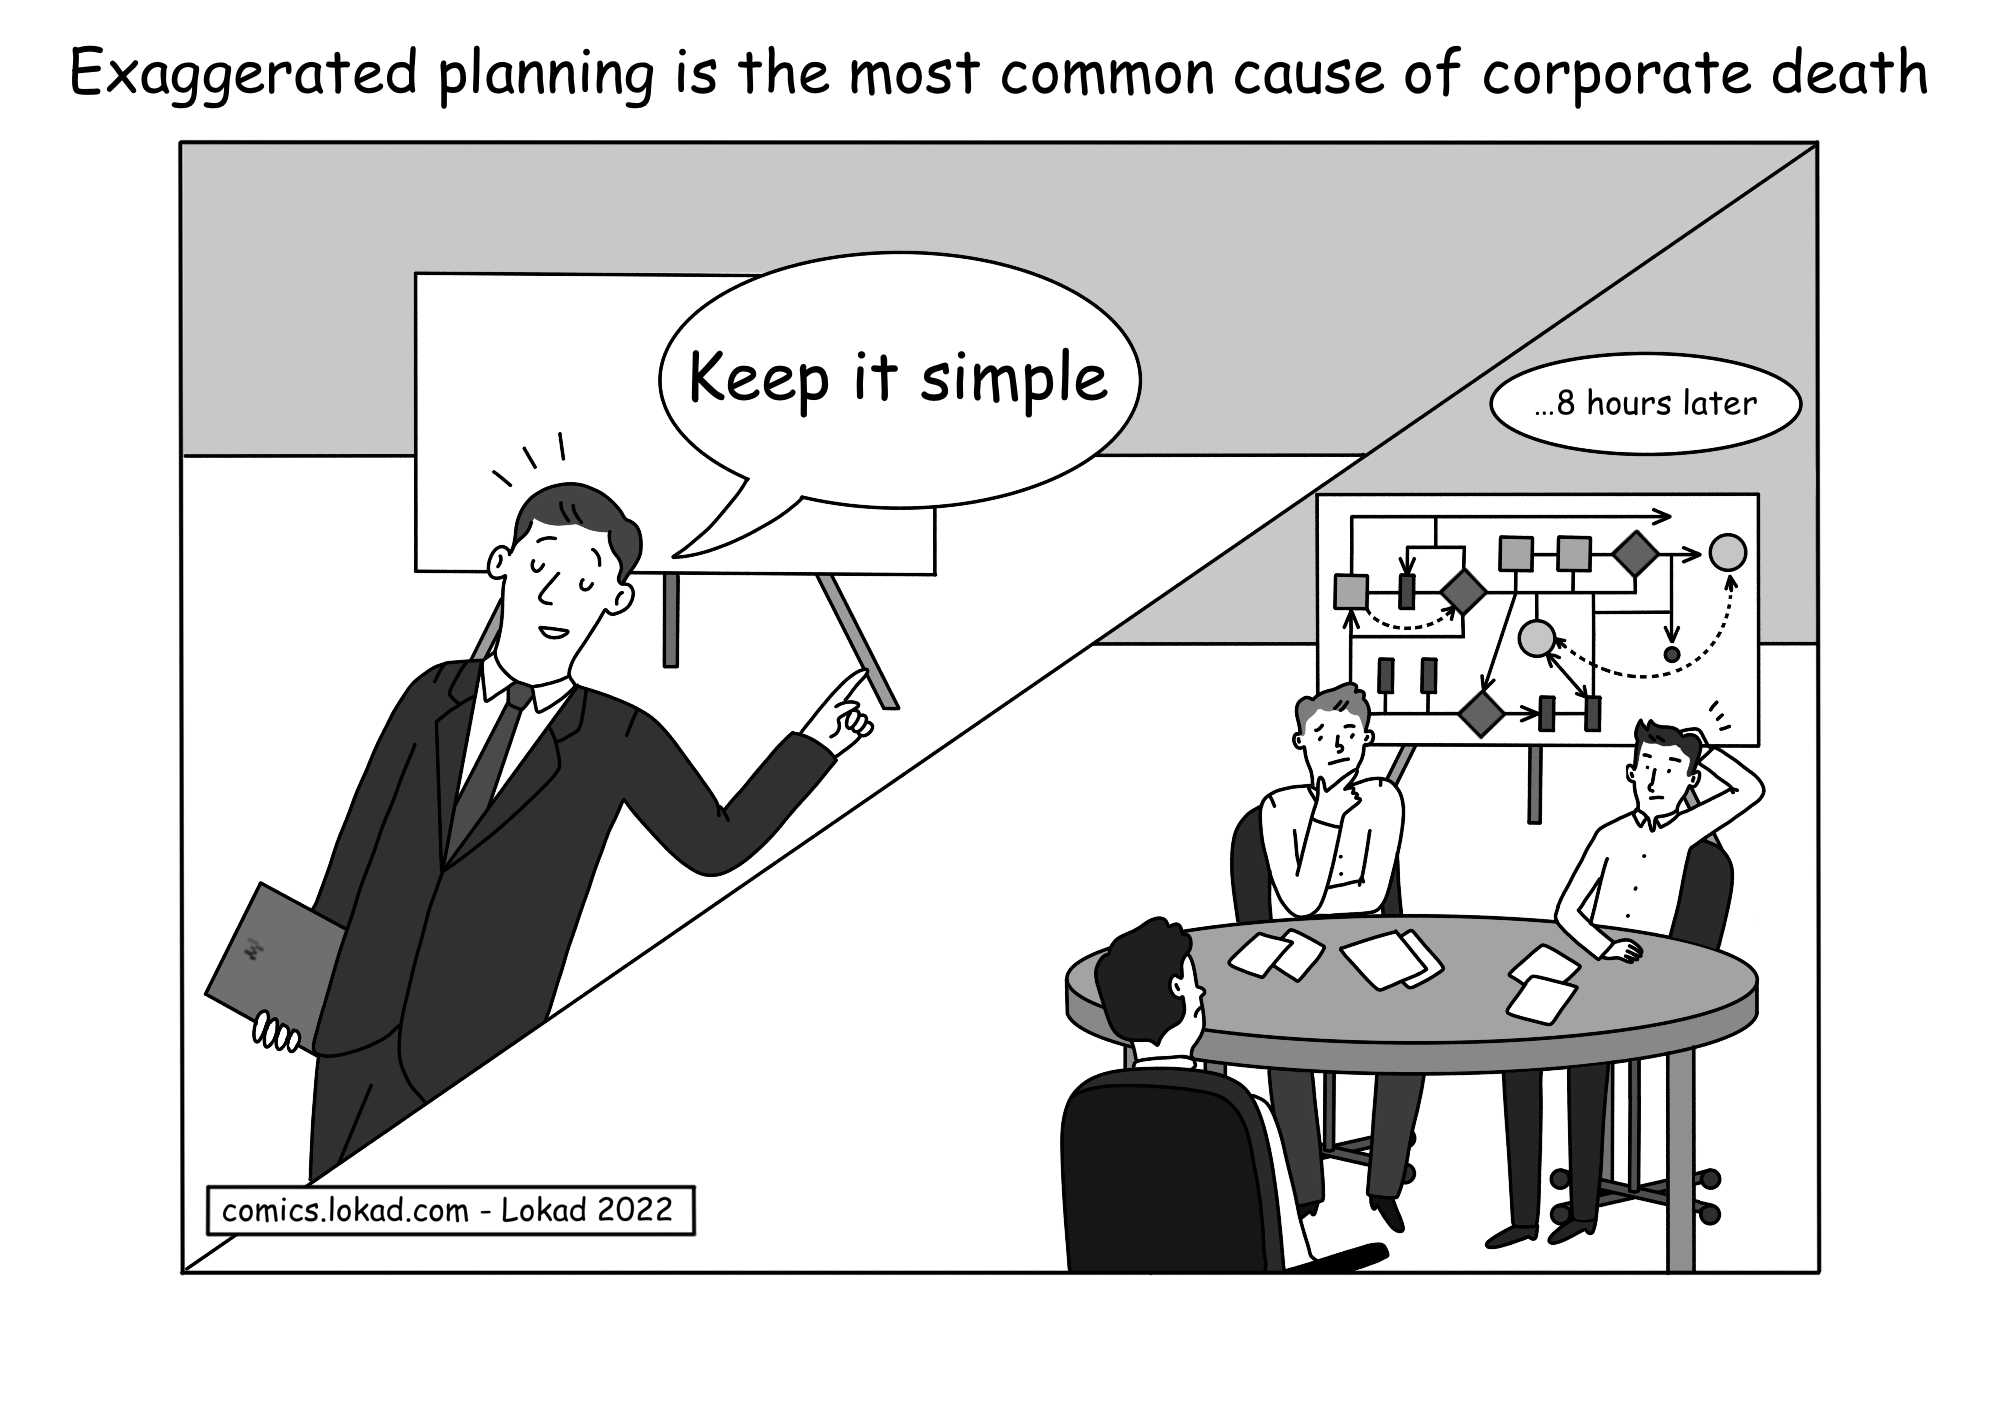 Exaggerated planning is the most common cause of corporate death